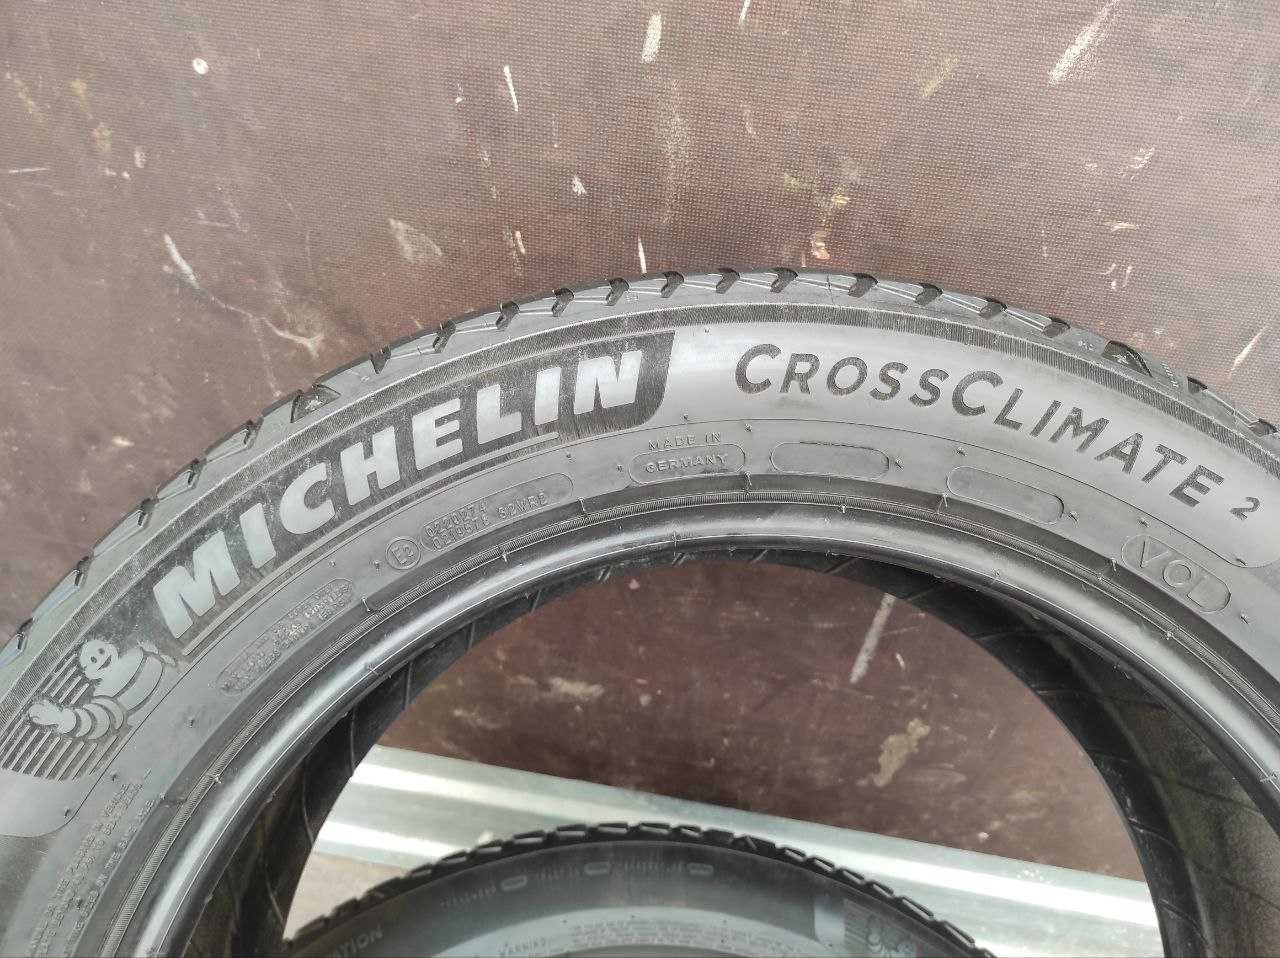 Michelin Cross Climate 2 235/55r19 made in Germany 2шт 21год 5,4мм M+S